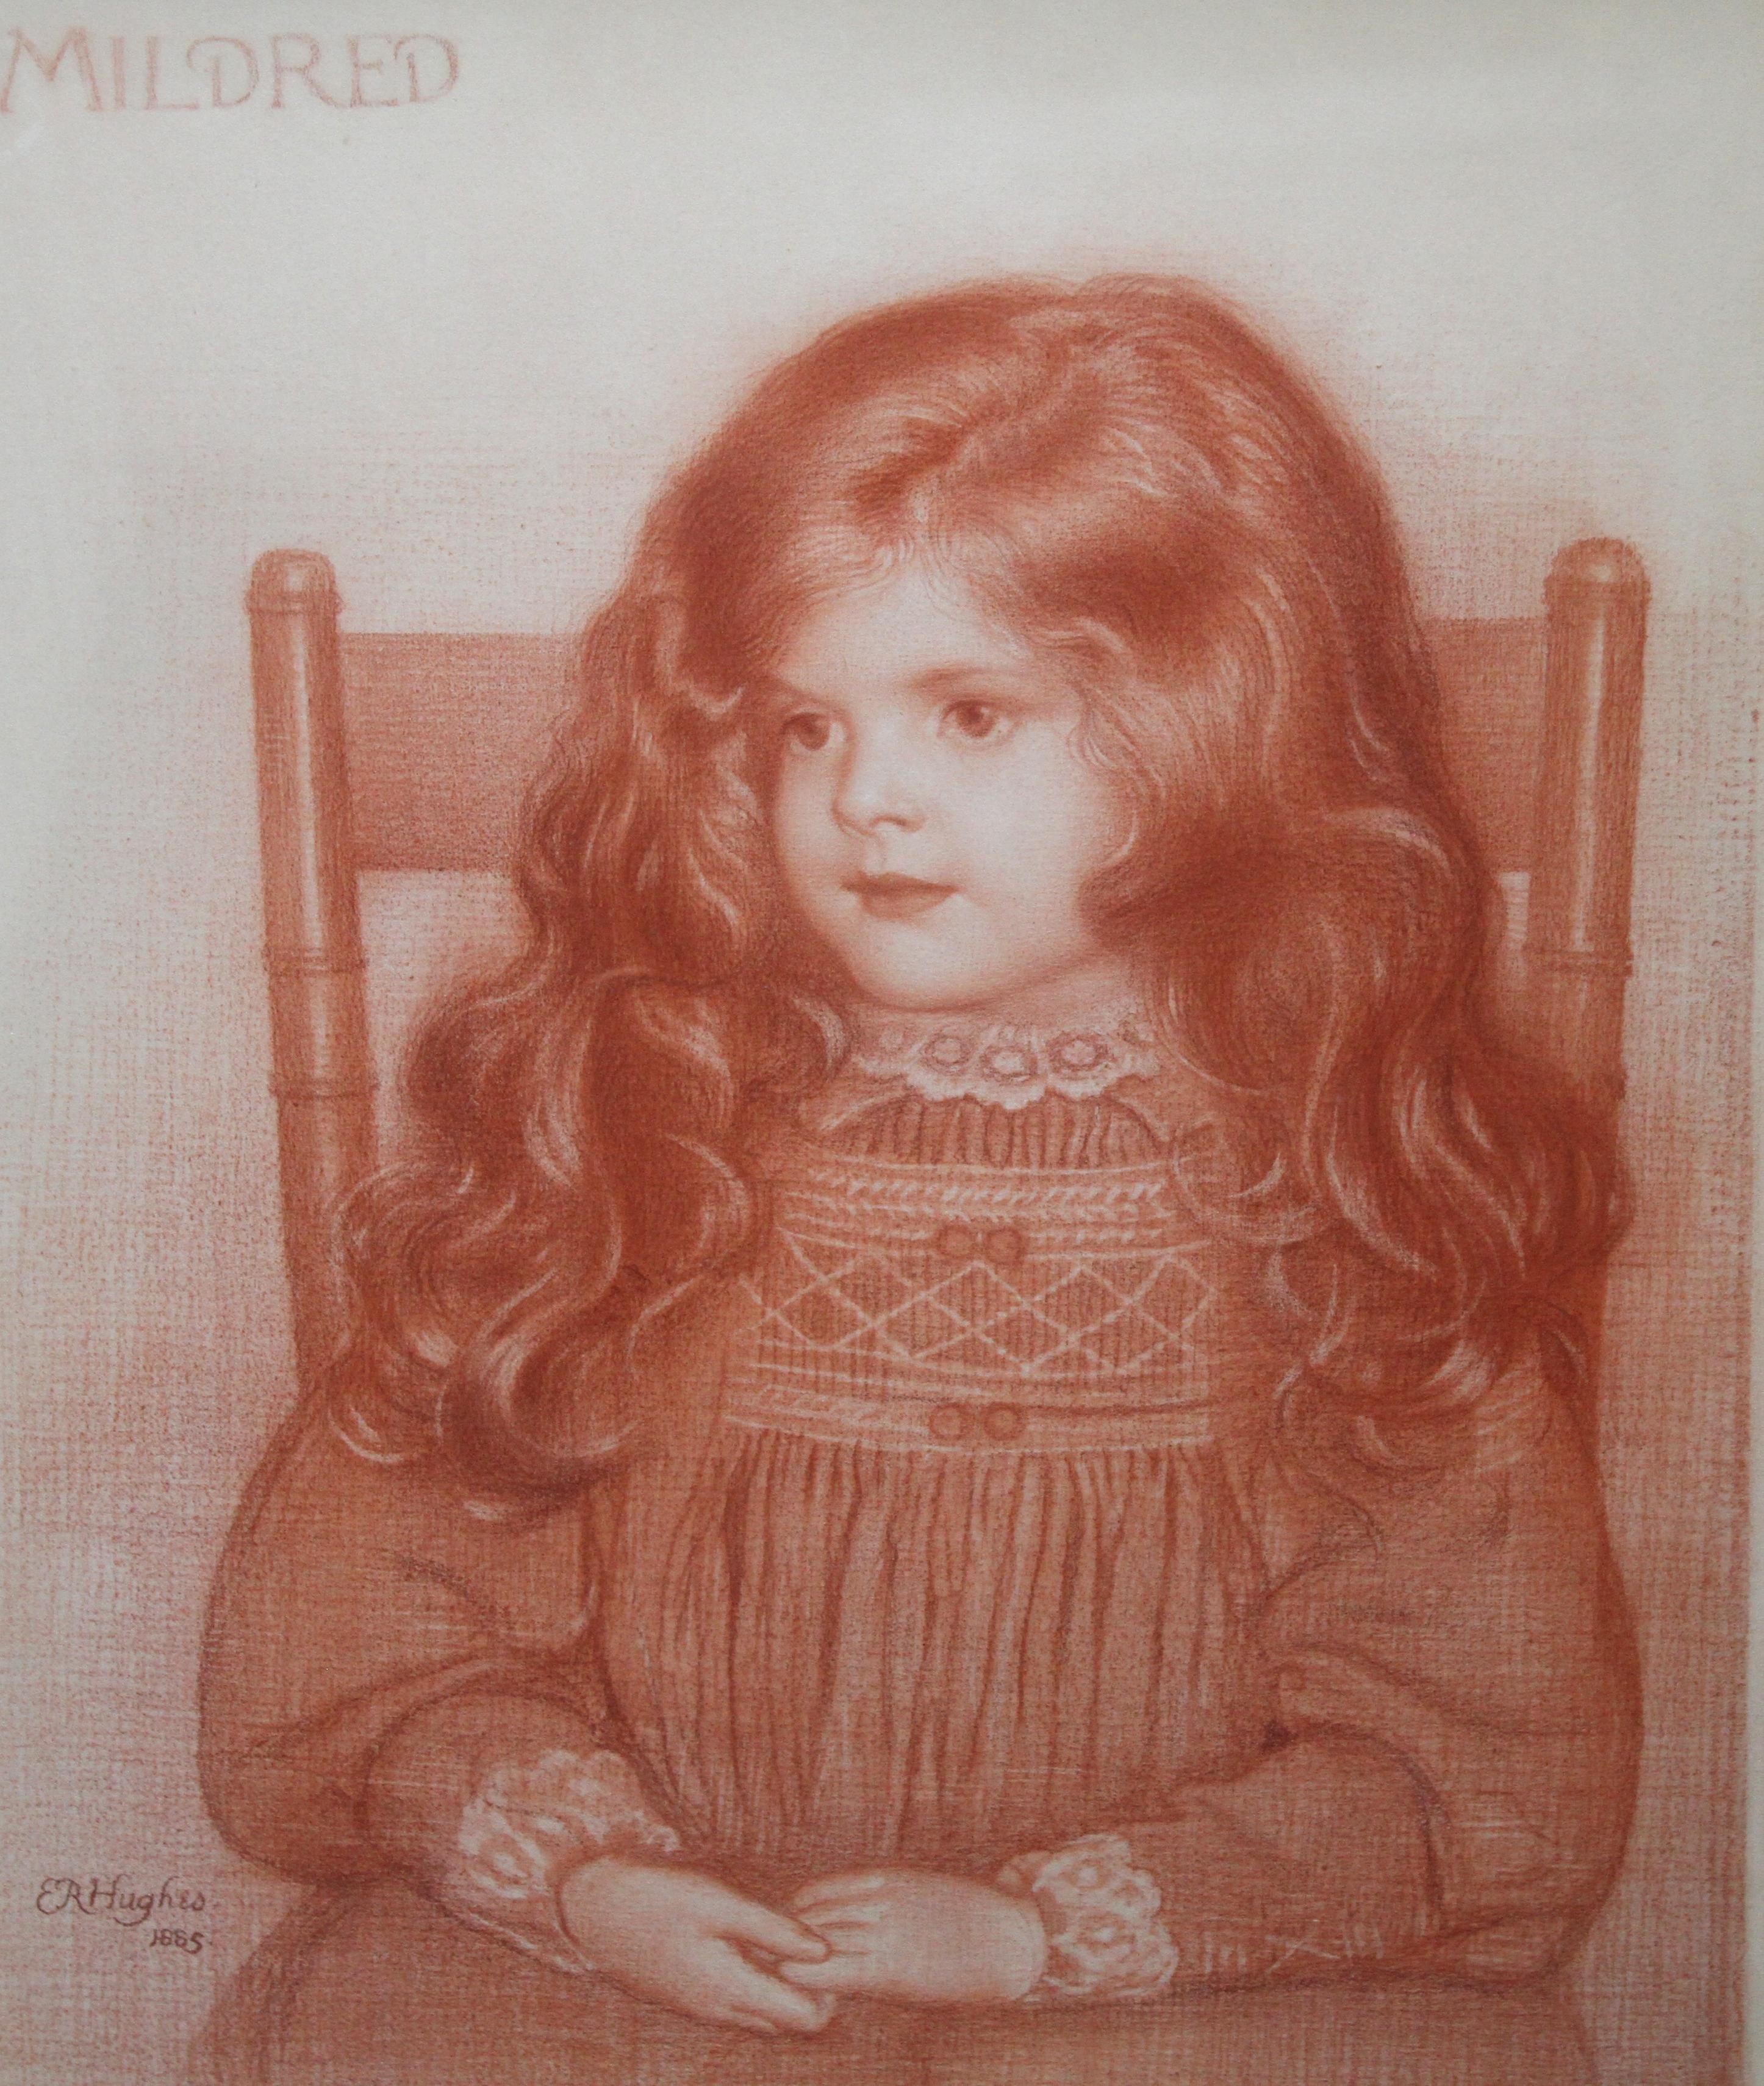 This captivating Victorian sanguine portrait drawing of a young girl is by Pre-Raphaelite British artist Edward Robert Hughes. The red chalk portrait dated 1885 is of Mildred, her name inscribed upper left. She is seated, hands in lap, her long hair